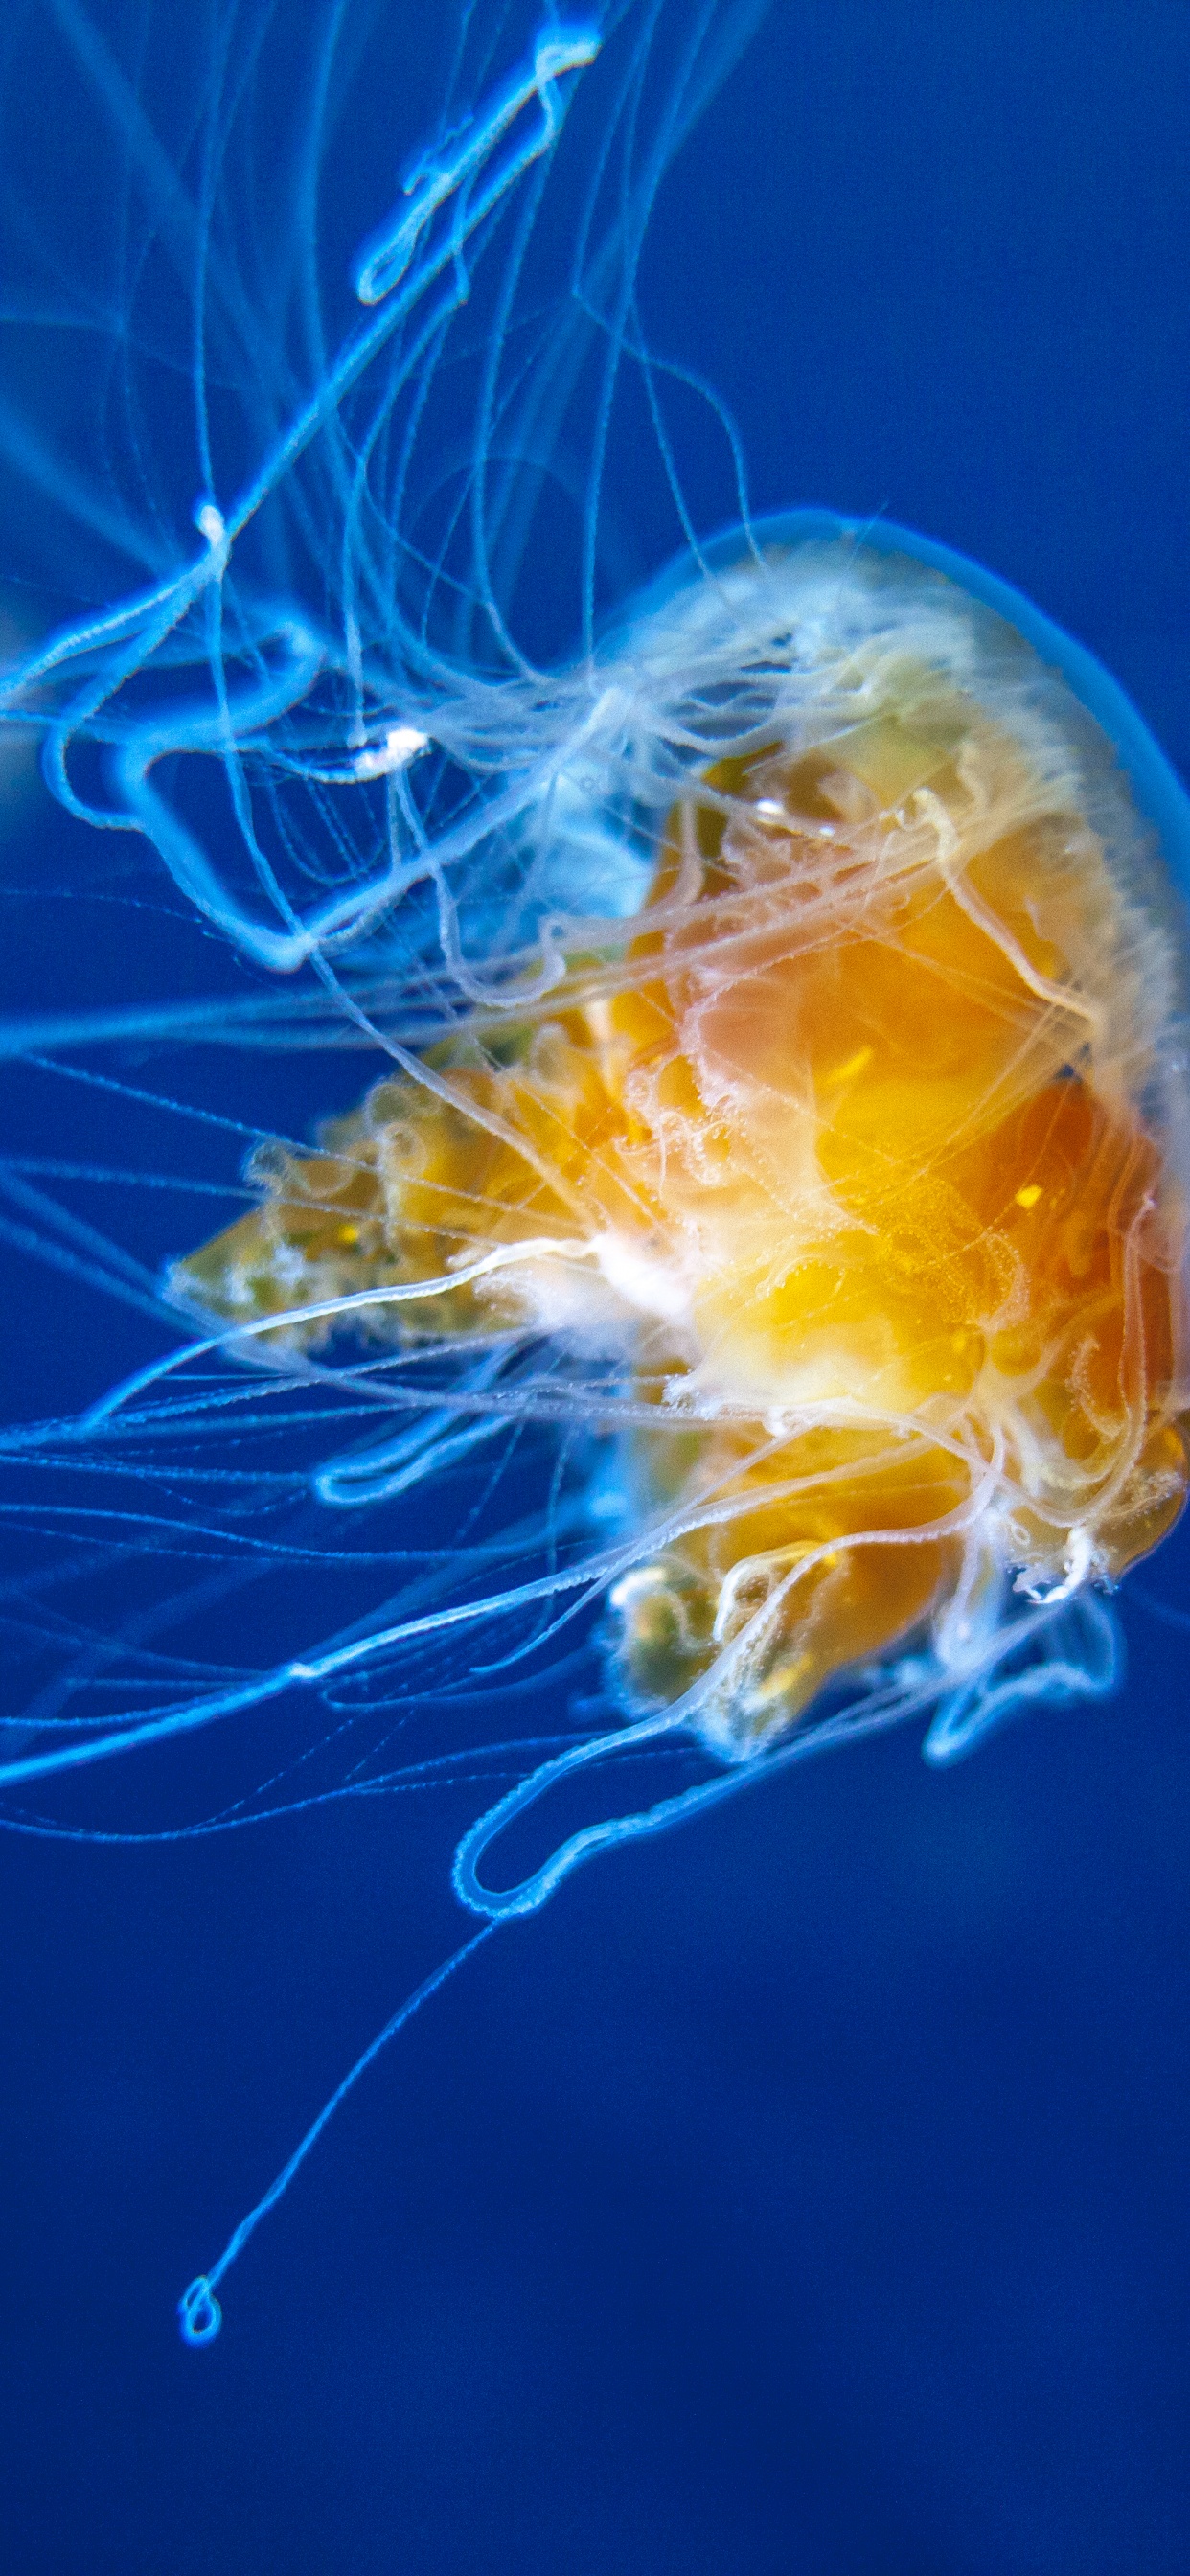 Yellow and White Jellyfish in Blue Water. Wallpaper in 1242x2688 Resolution